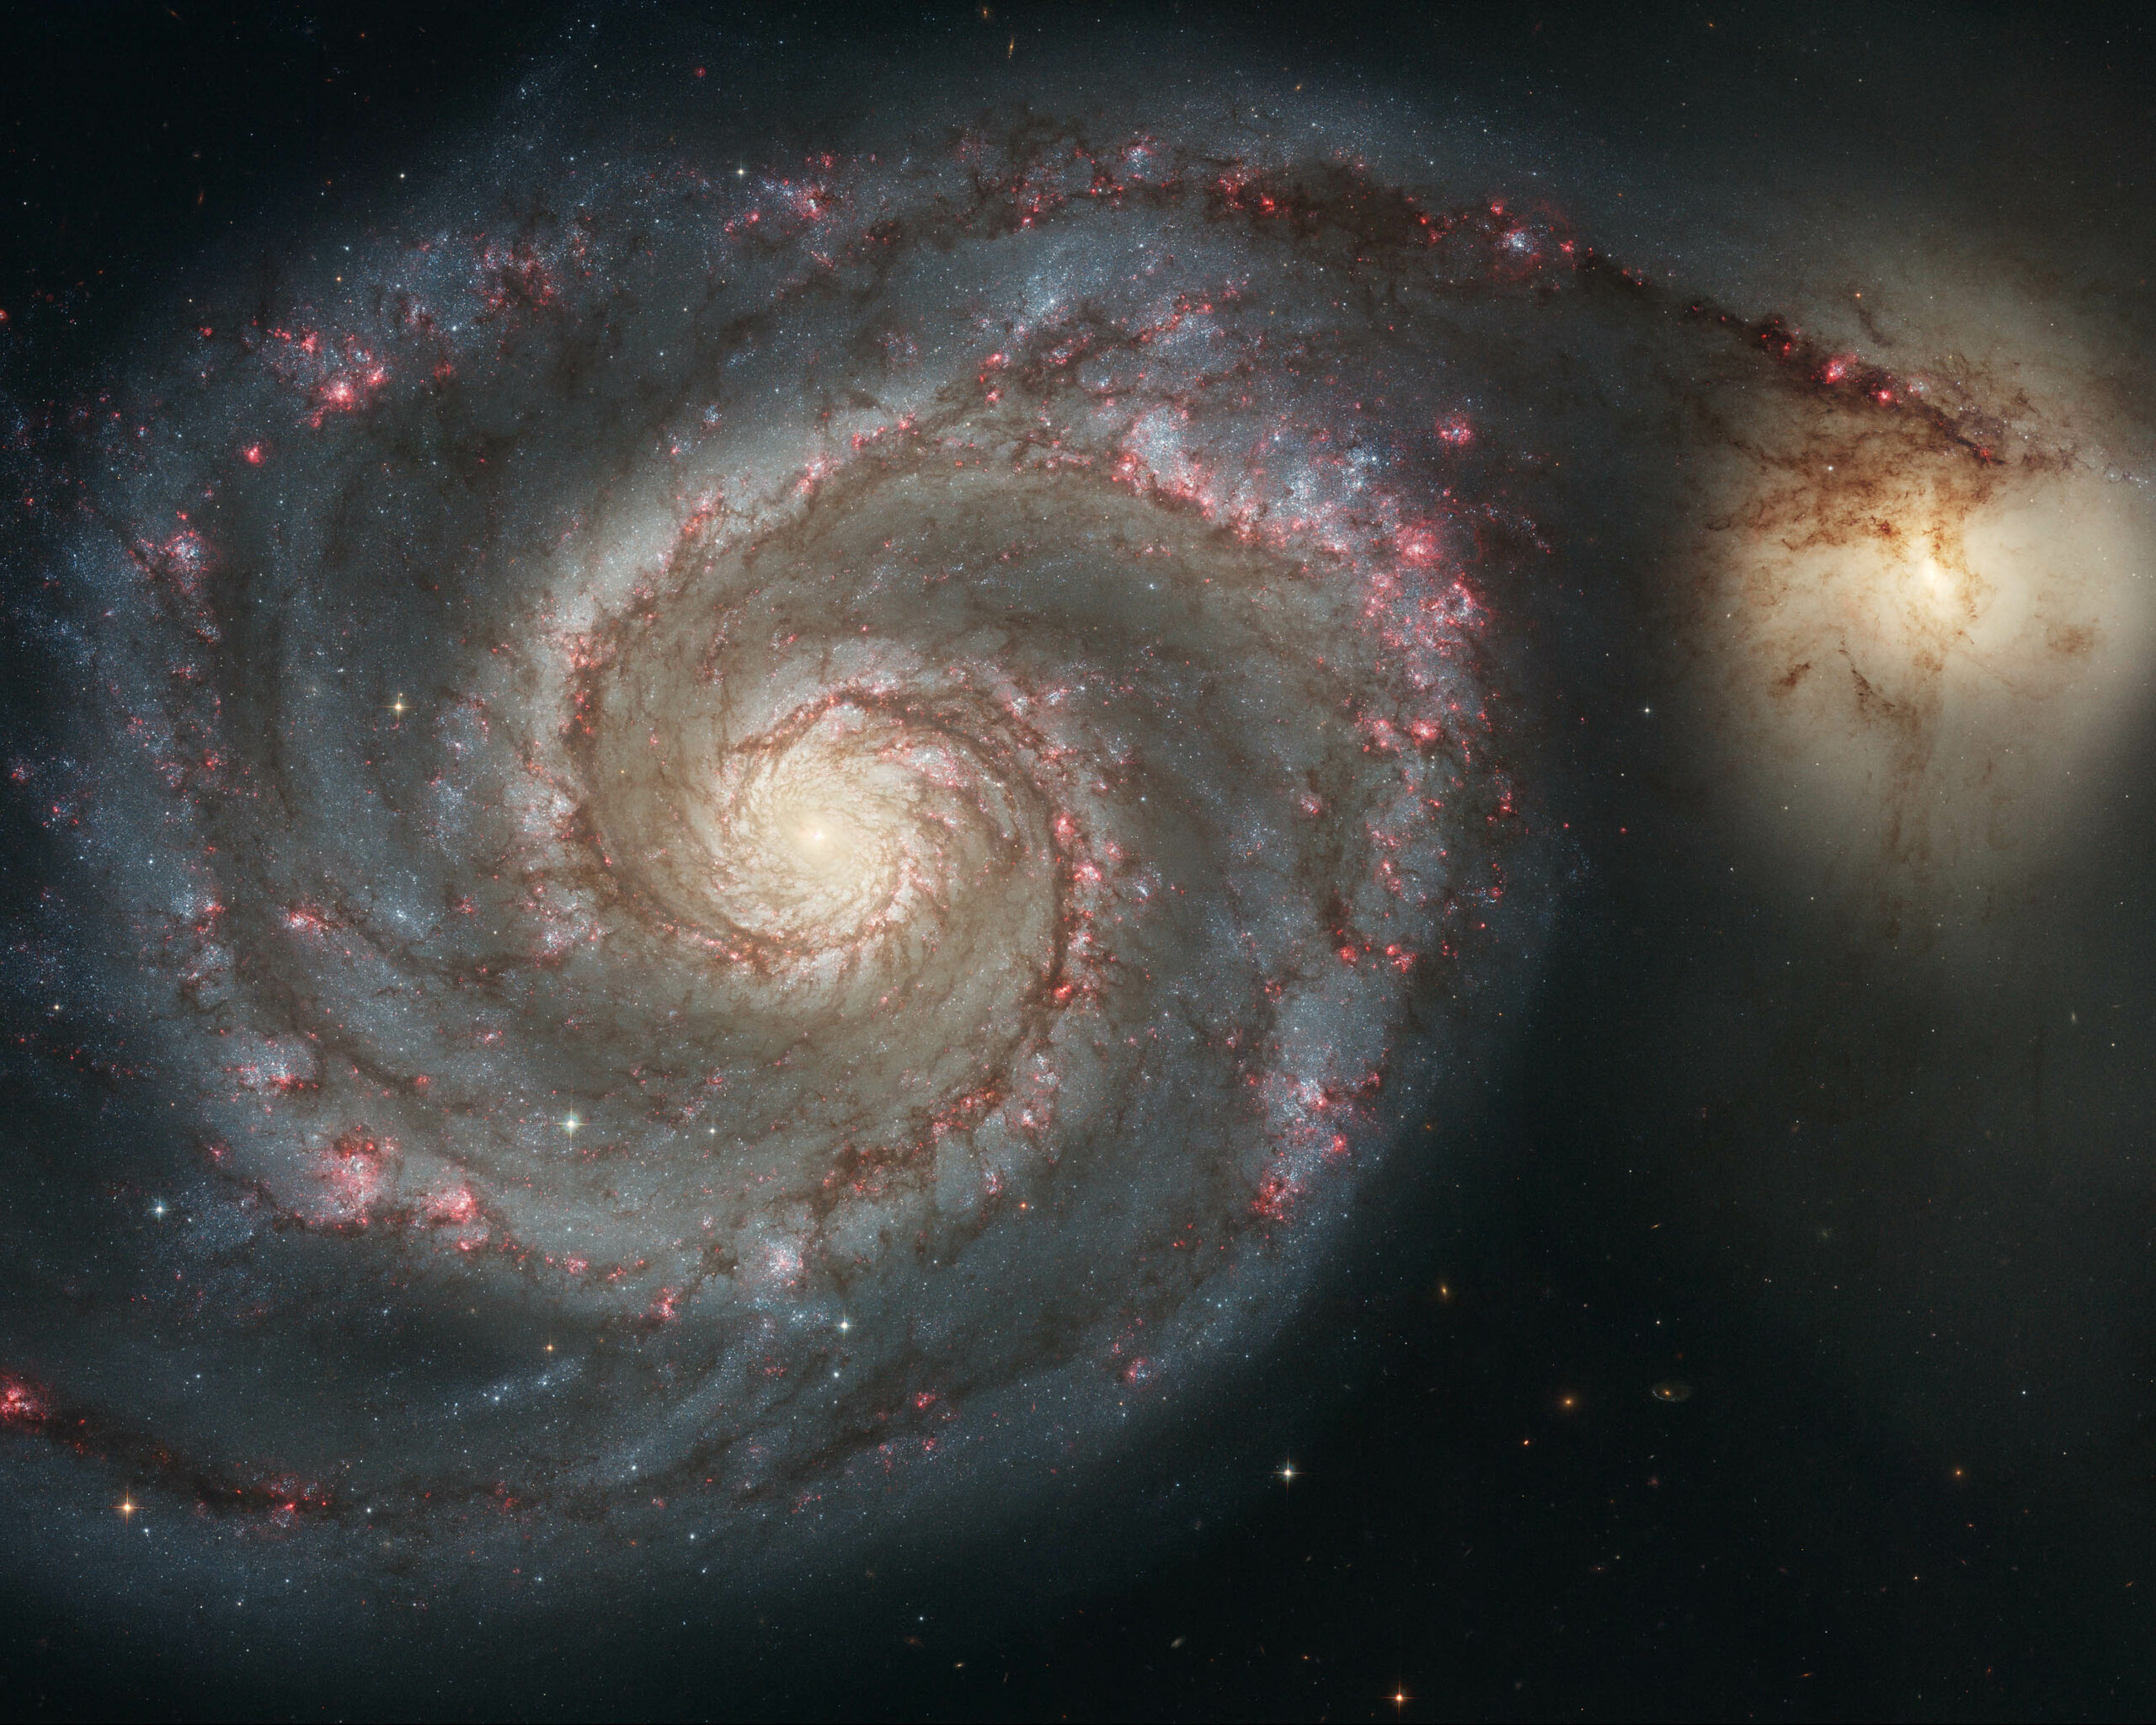 a large spiral galaxy next to a smaller ball of light in space